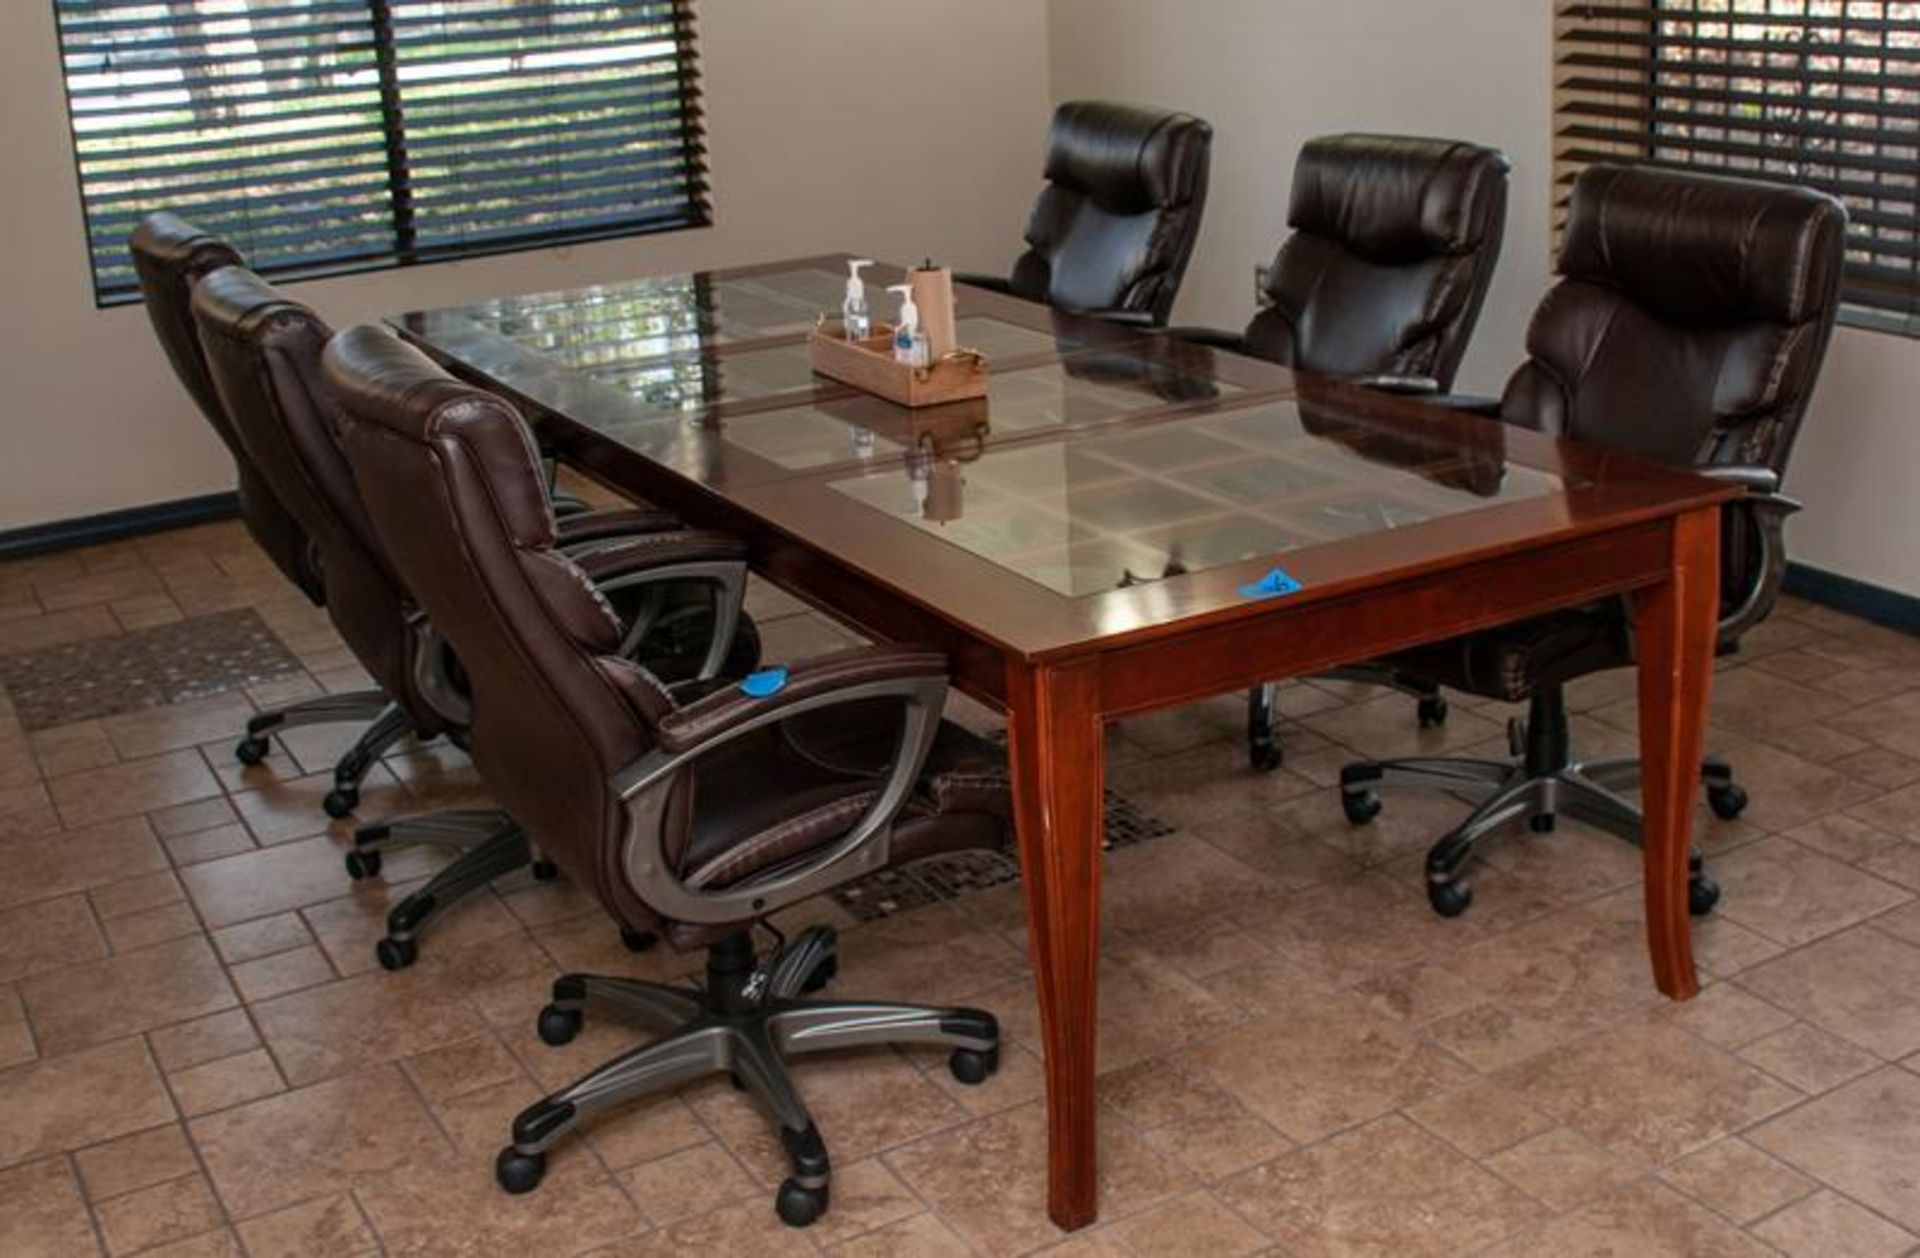 Conference room table 110" x 44" (6) chairs, glass shelving unit, nothing attached to walls